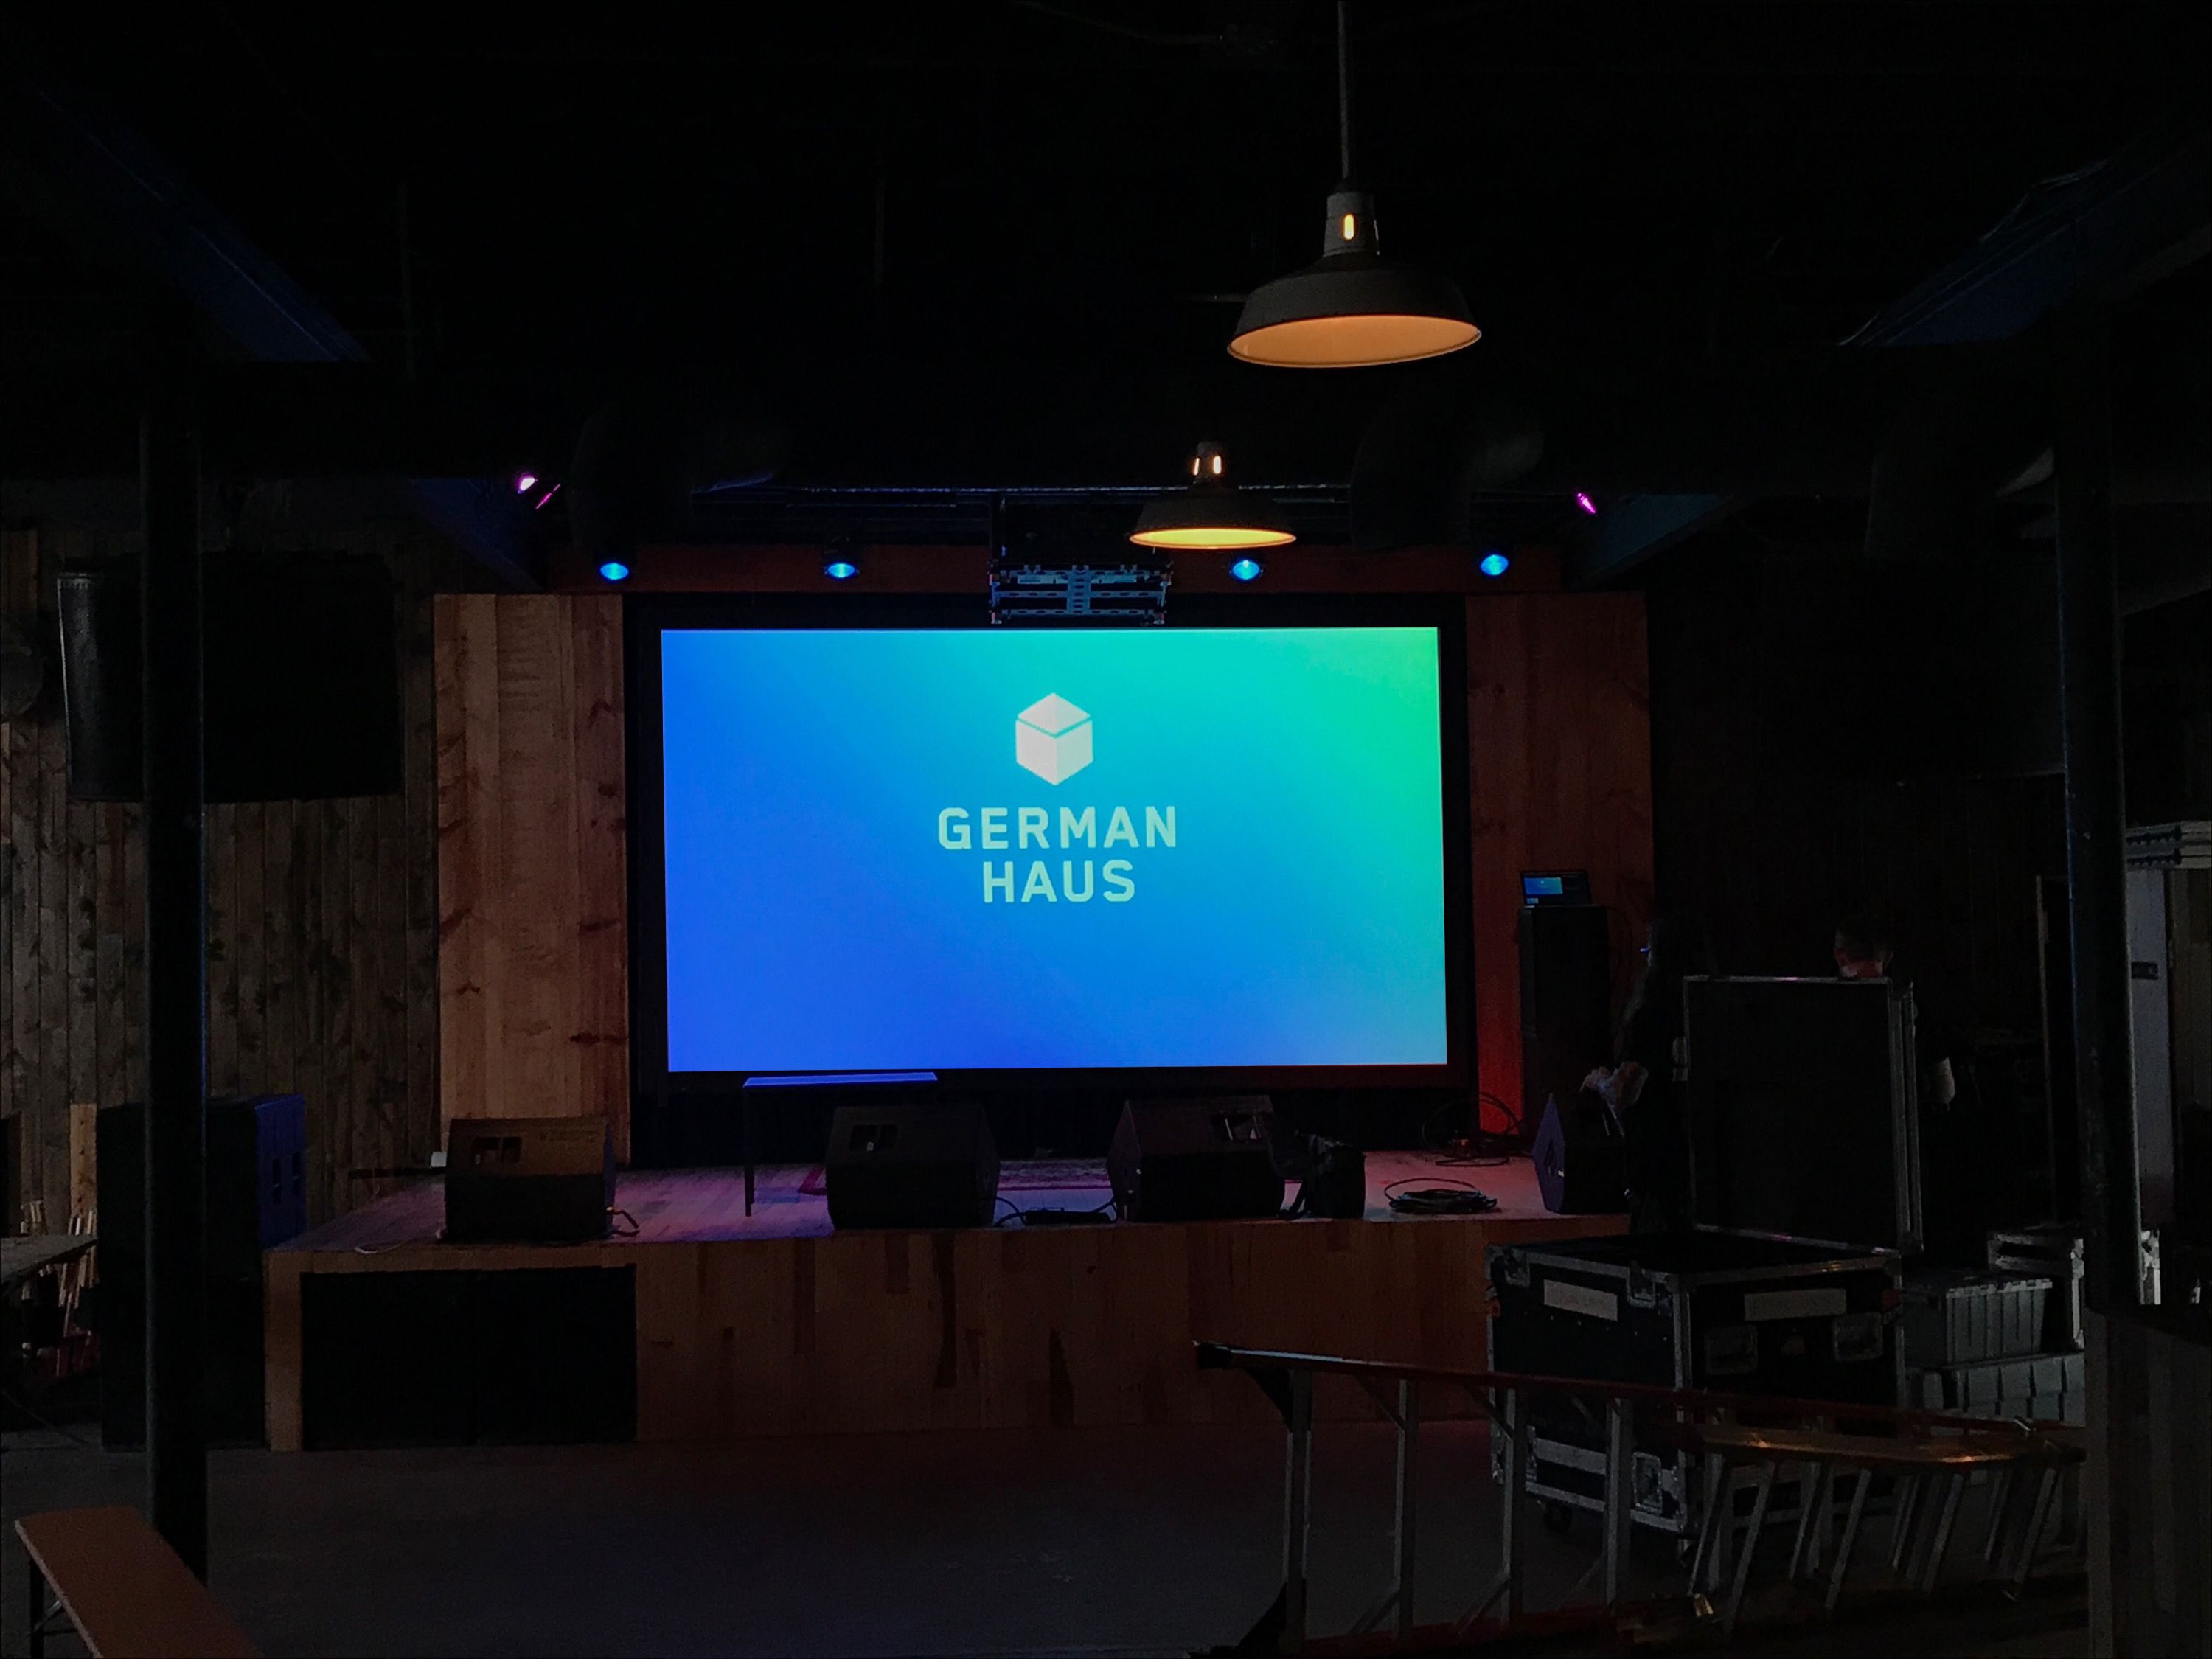 A projection display at SXSW for German Haus